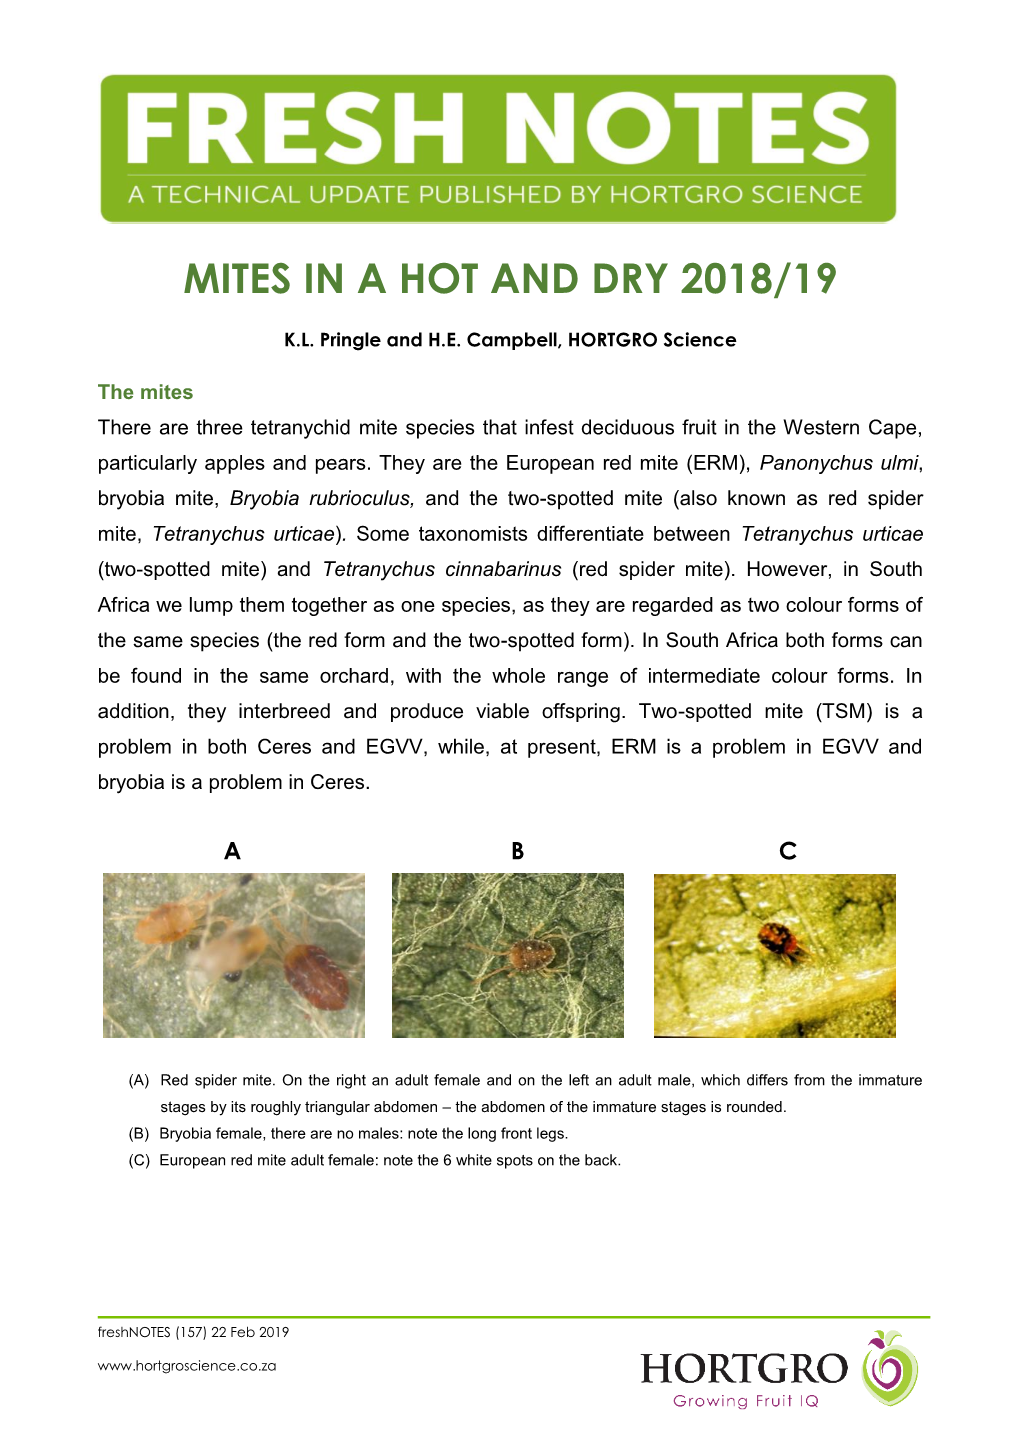 Mites in a Hot and Dry 2018/19